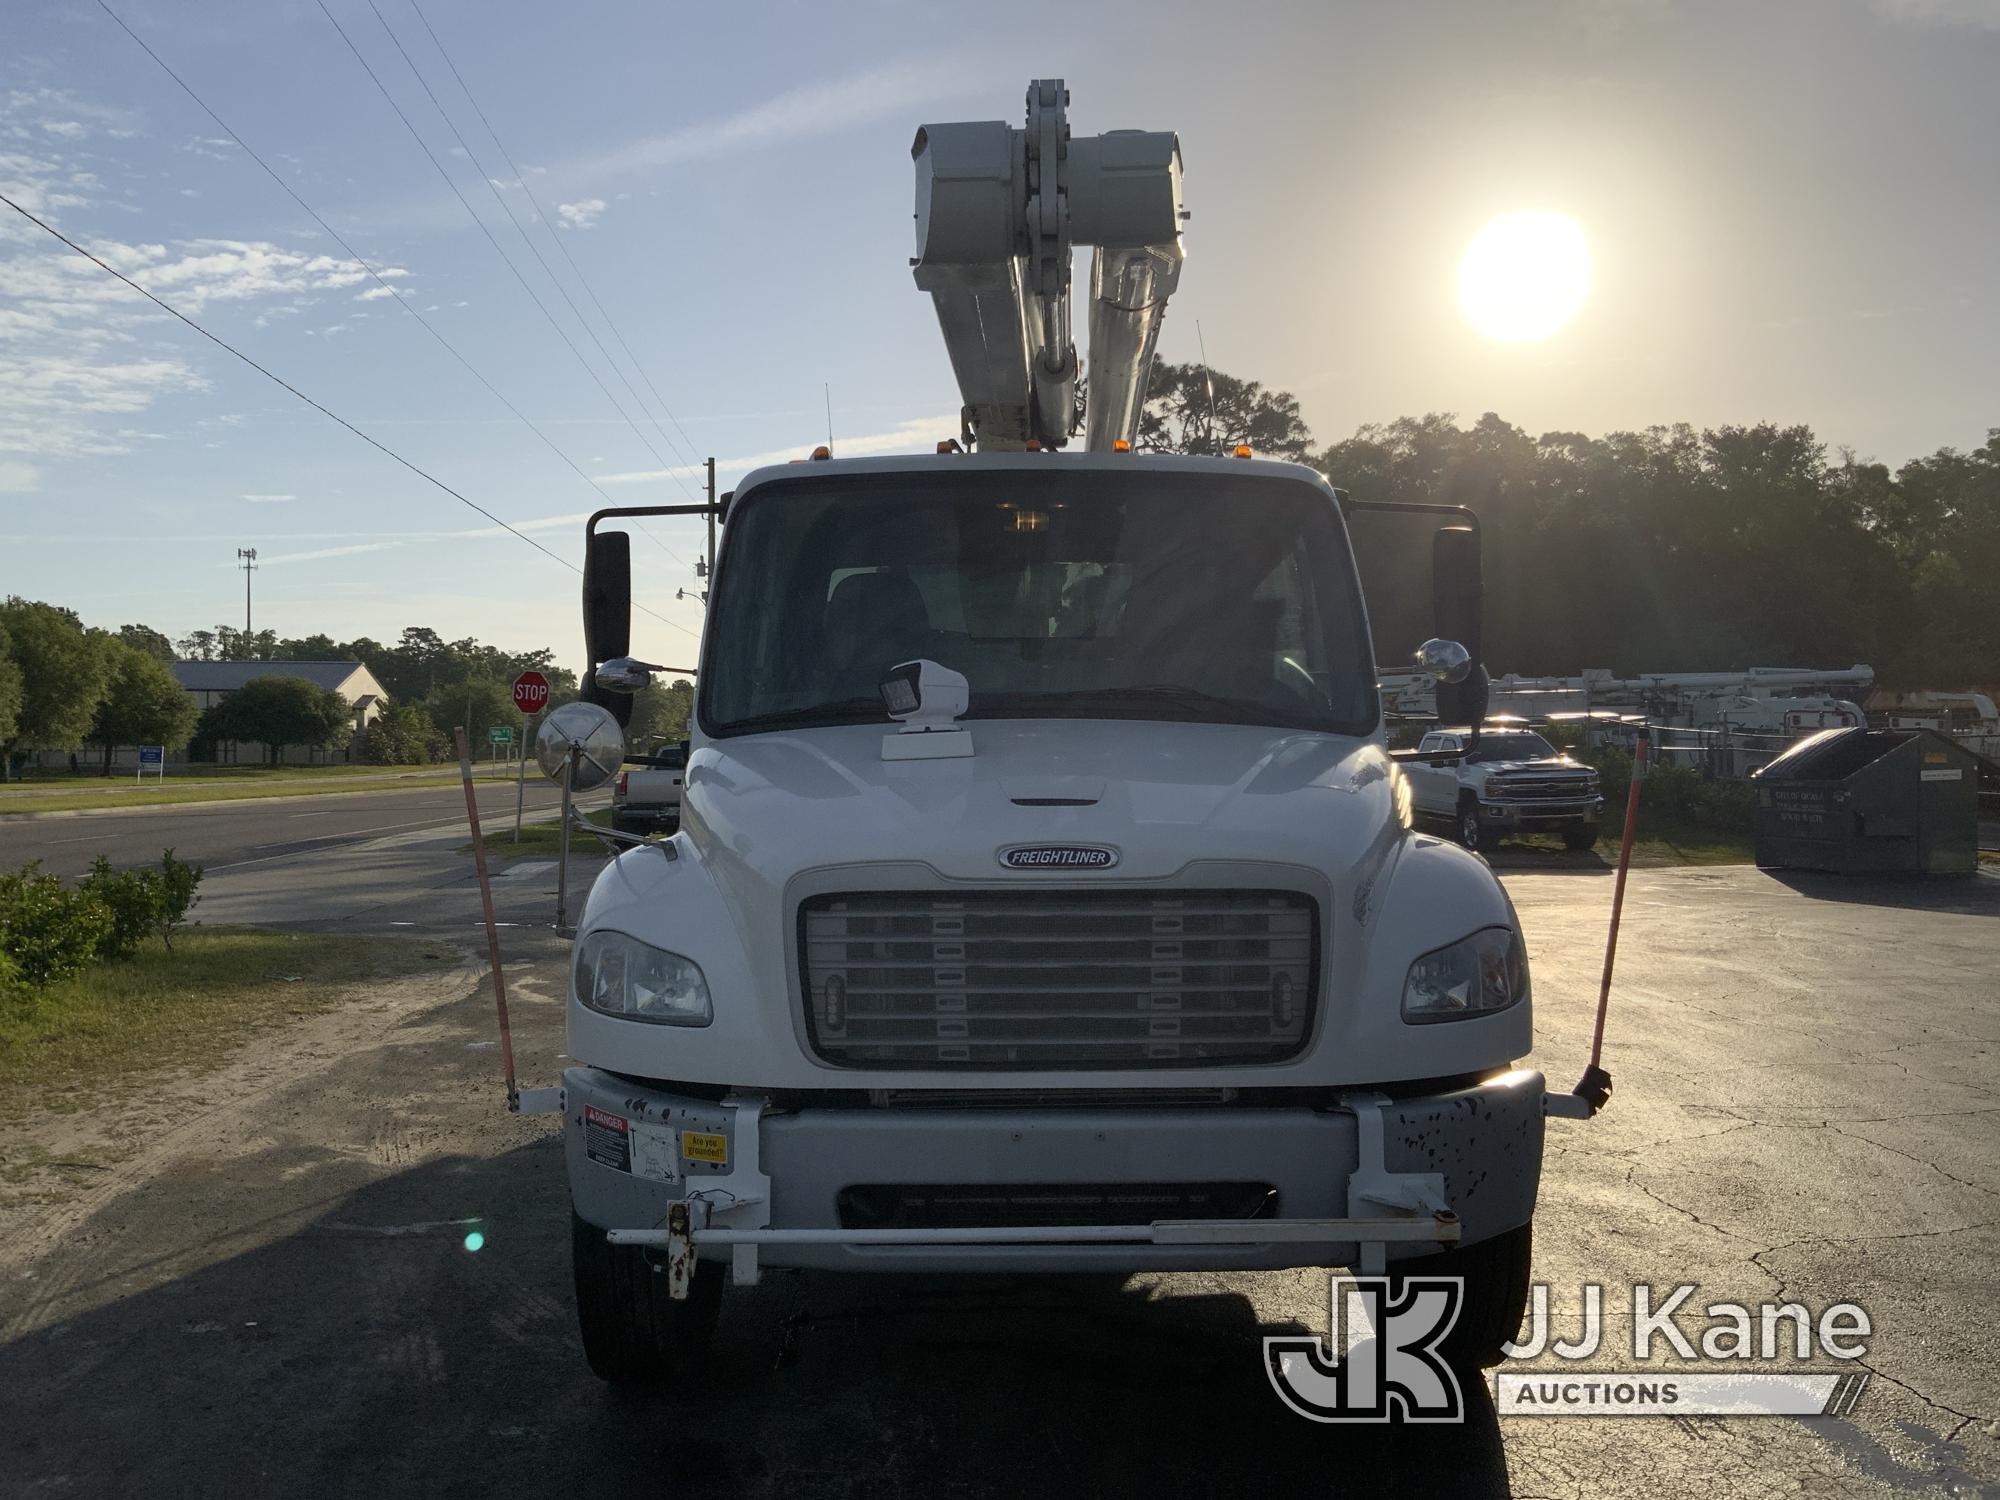 (Ocala, FL) Altec L42A, Over-Center Bucket Truck center mounted on 2014 Freightliner M2 106 Utility